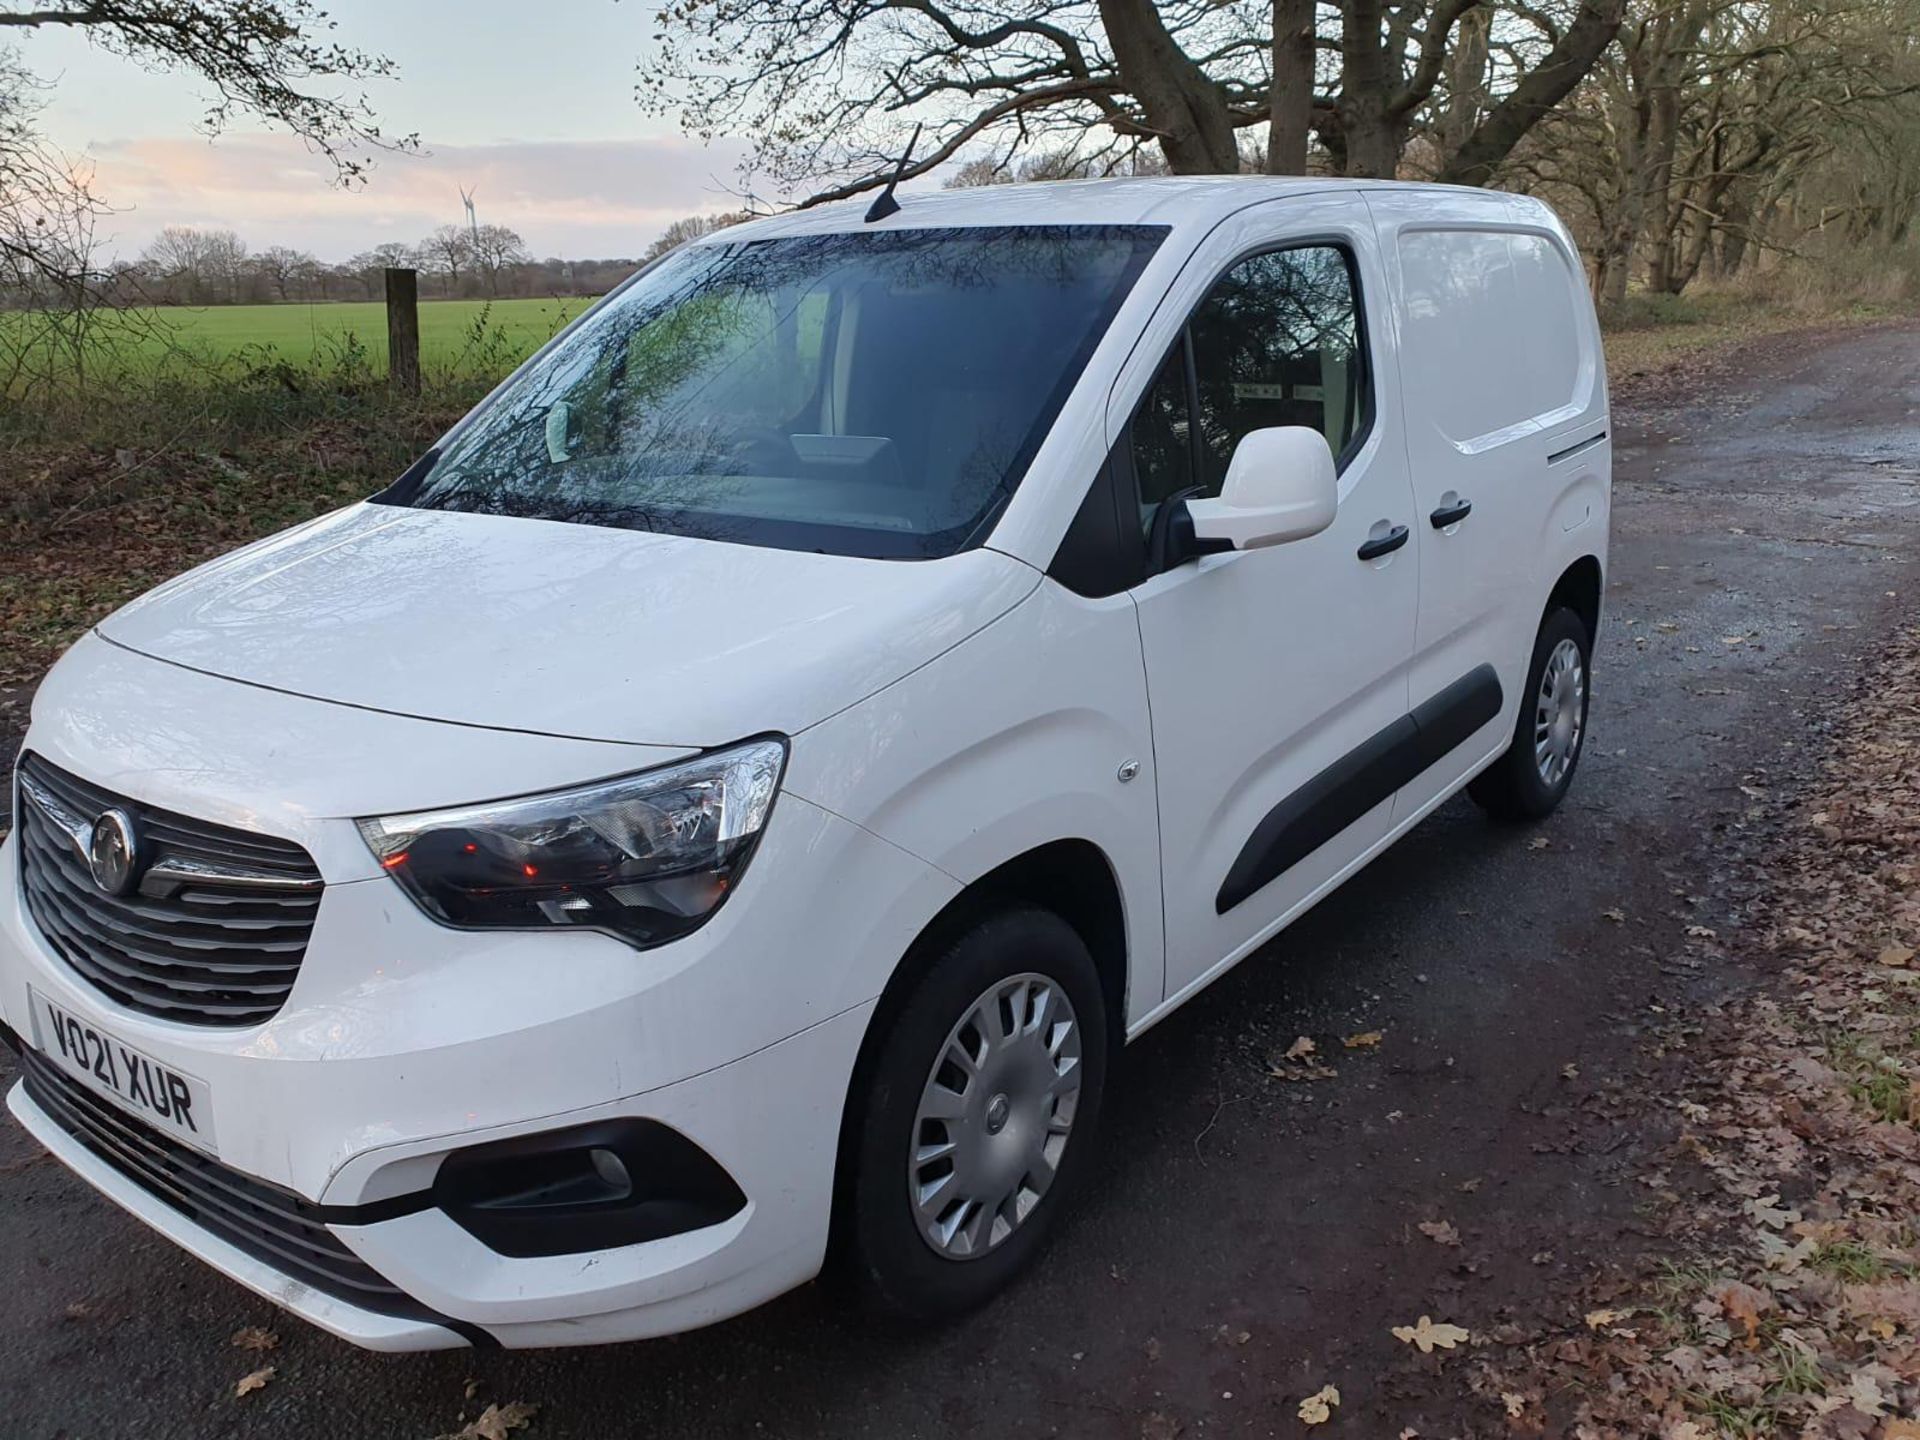 2021 21 Vauxhall combo sportive White panel van - 3 seats - air con - ply lined - 2 keys - VO21 XUR - Image 3 of 7